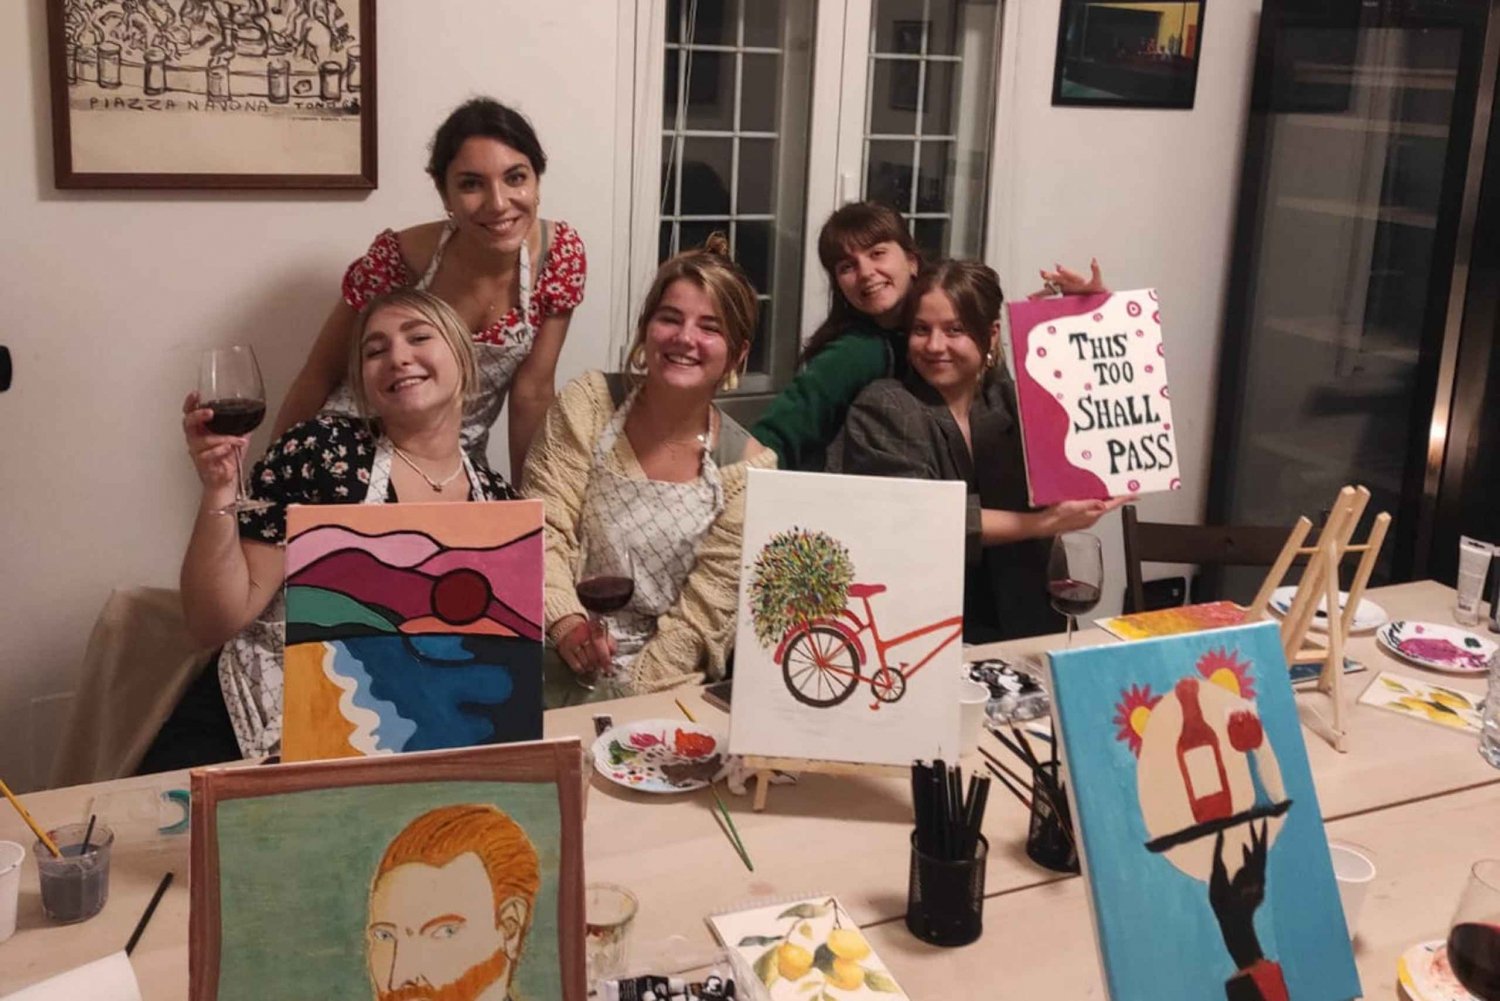 Rome: Small-Group Art Class with Wine